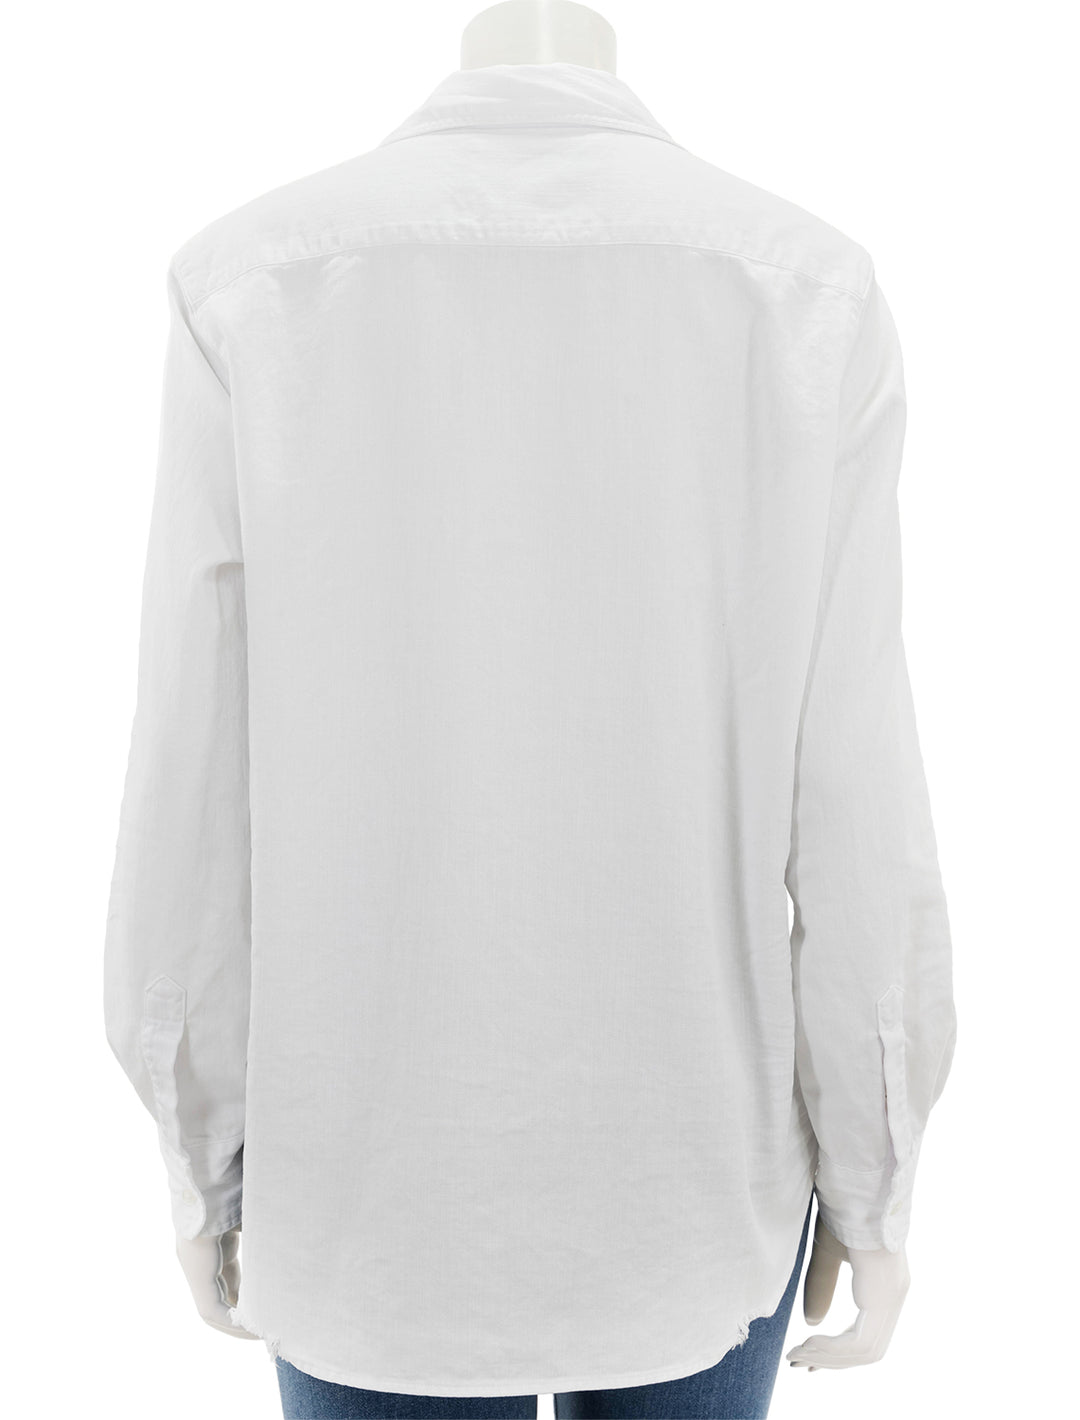 Back view of Frank & Eileen's eileen shirt in distressed white denim.